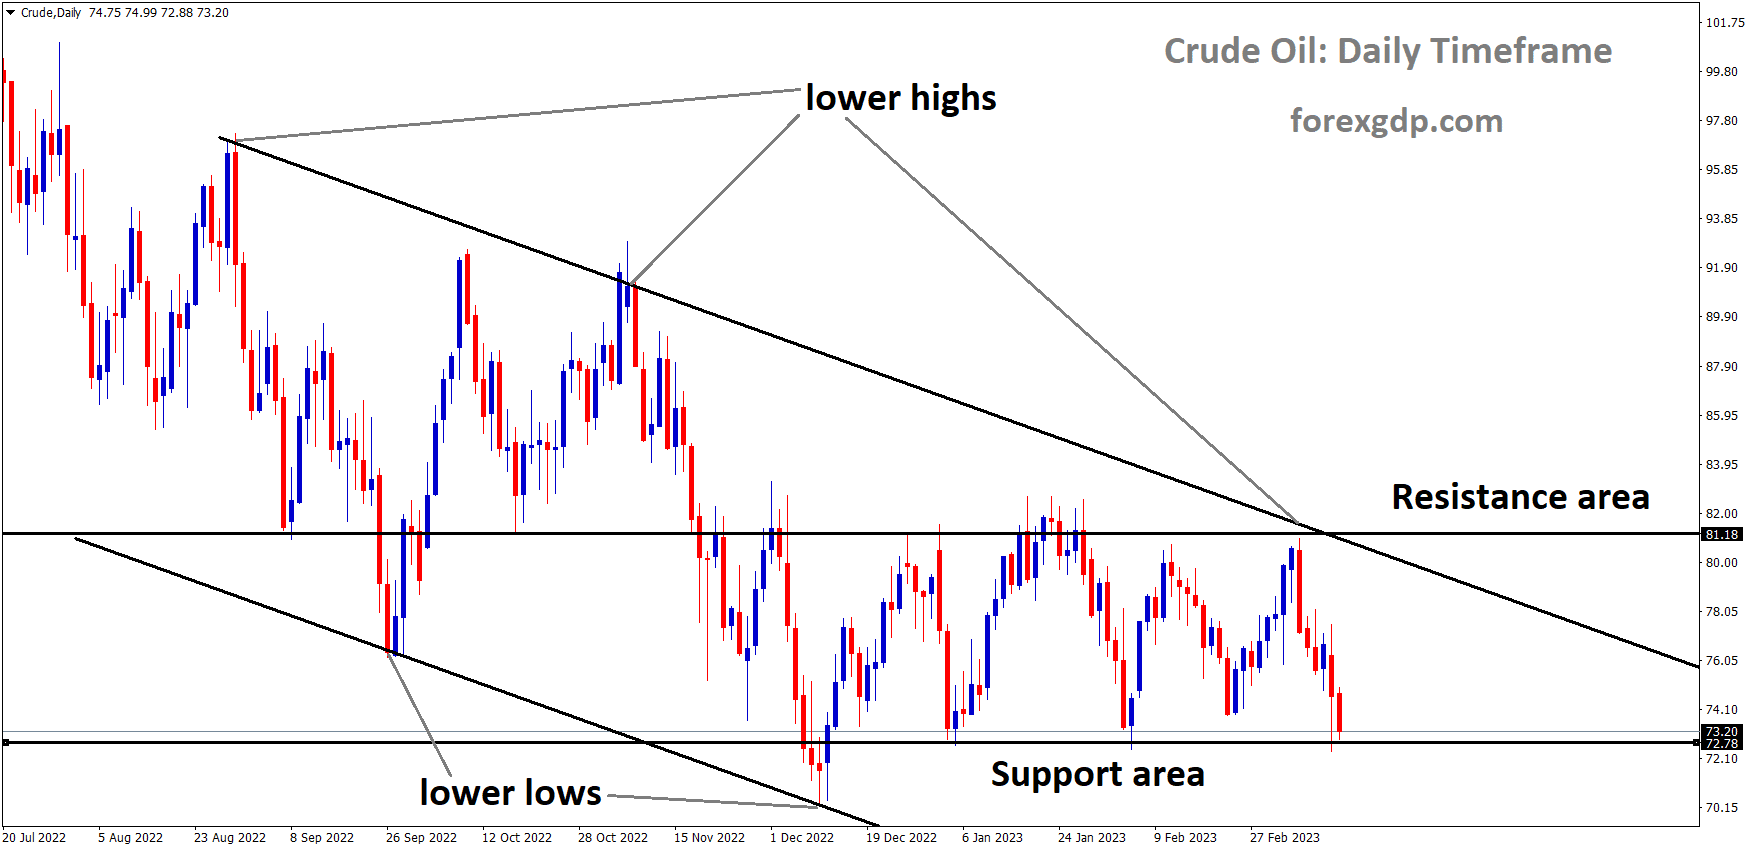 Crude Oil is moving in the Descending channel and the market has reached the horizontal support area of the minor Box pattern